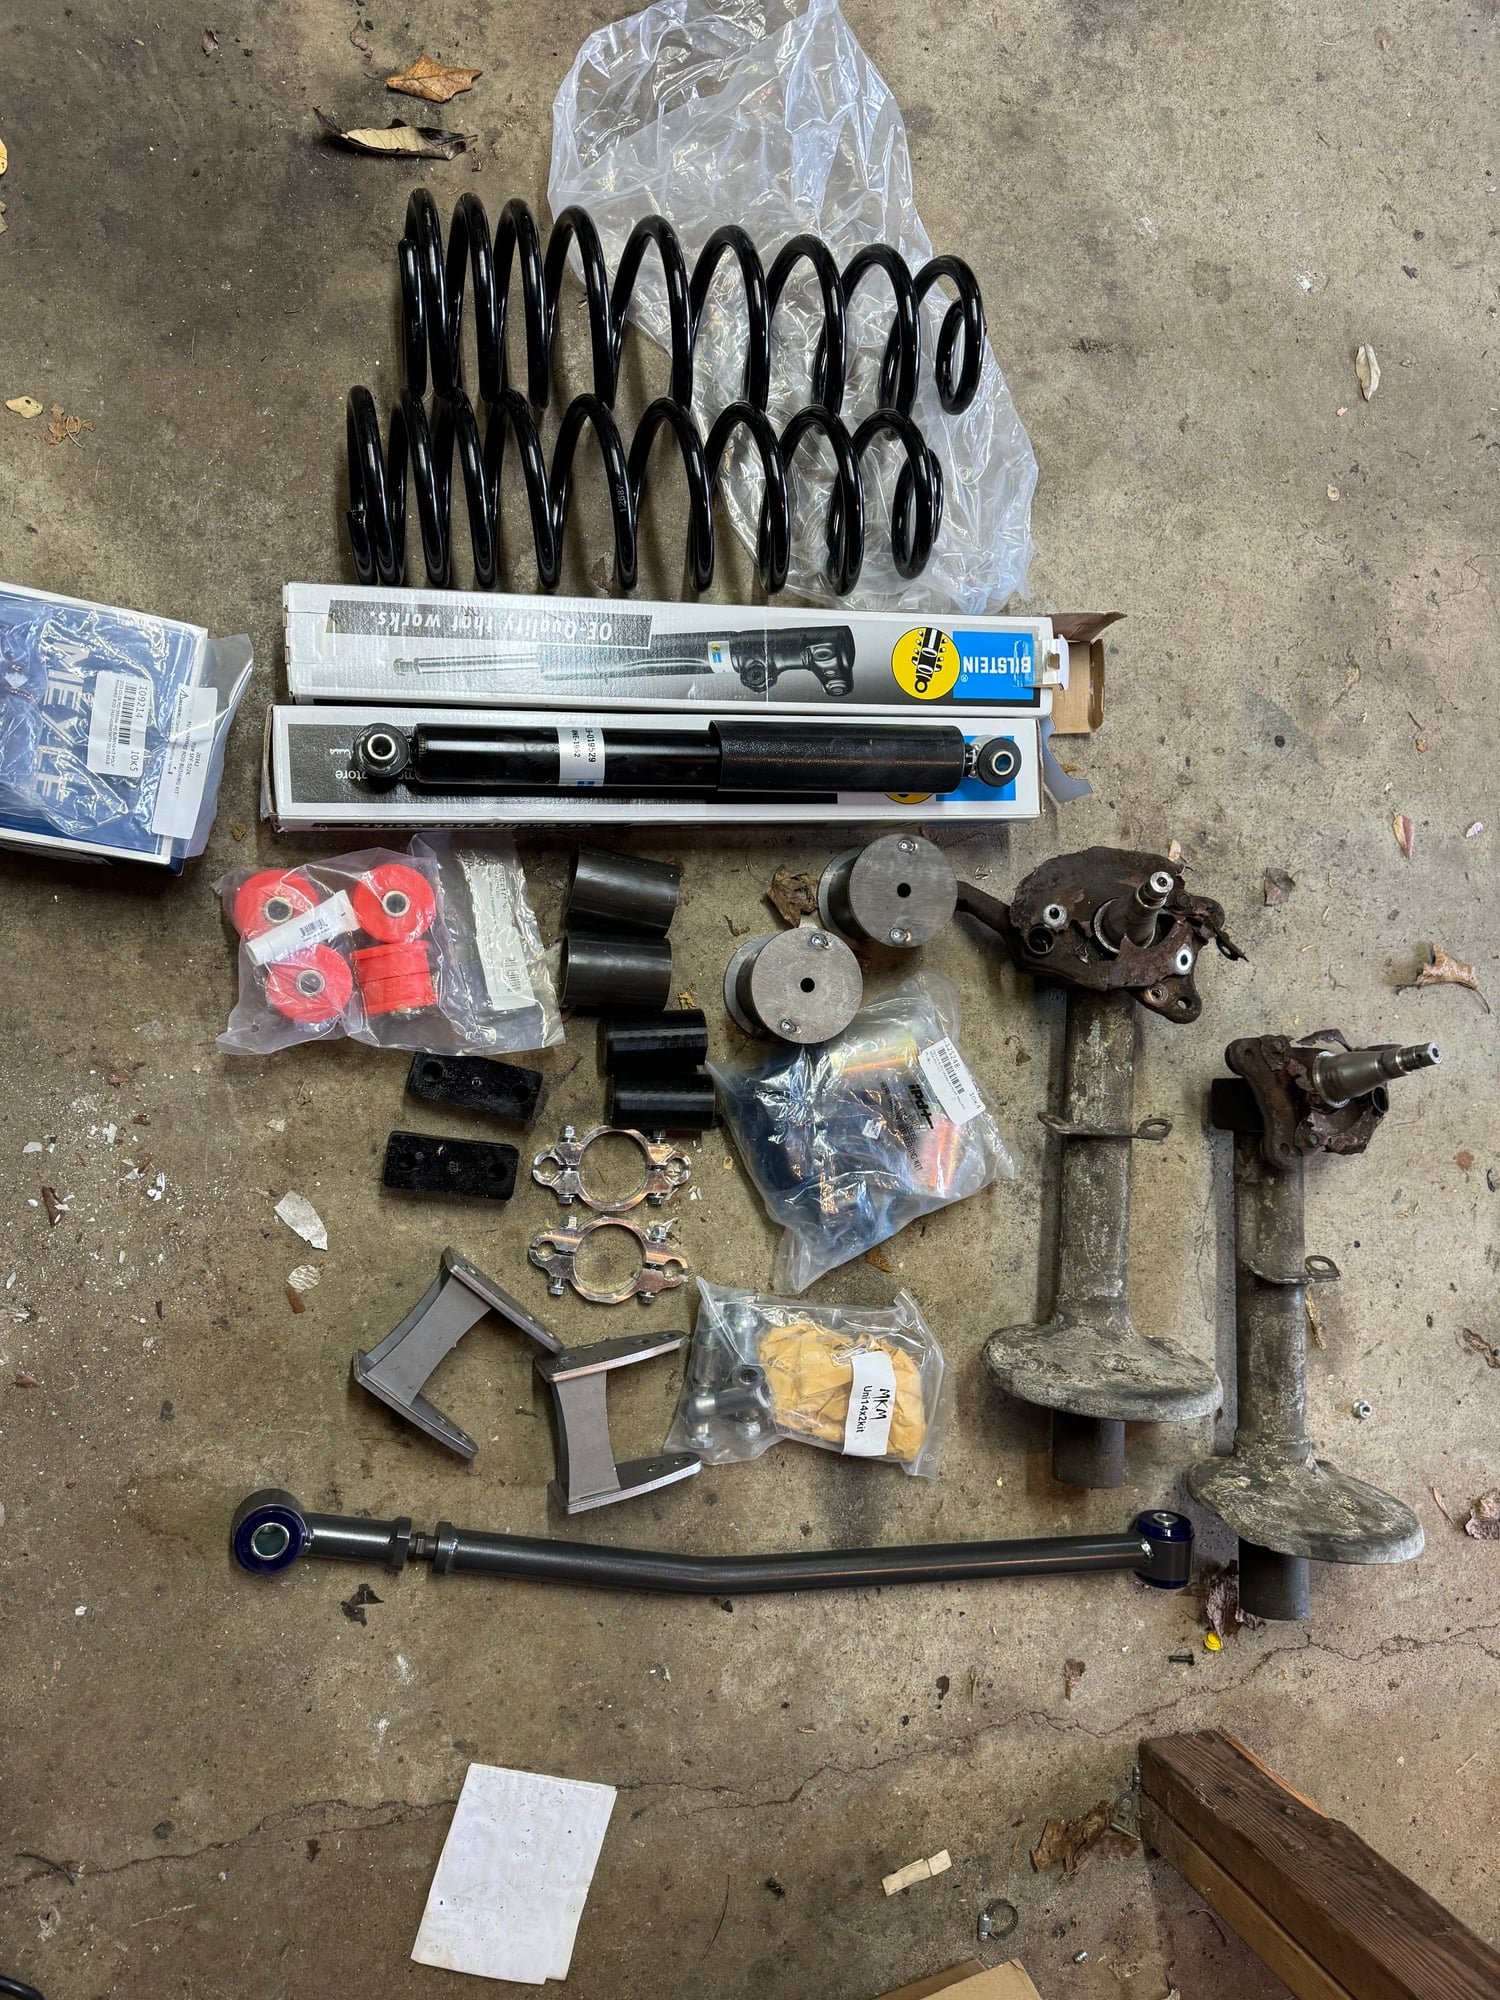 Steering/Suspension - Volvo 240 Lucas Lift Kit with PanHard Bar Bushings Rear Springs and Struts - New - All Years Volvo 240 - Trumbull, CT 06611, United States